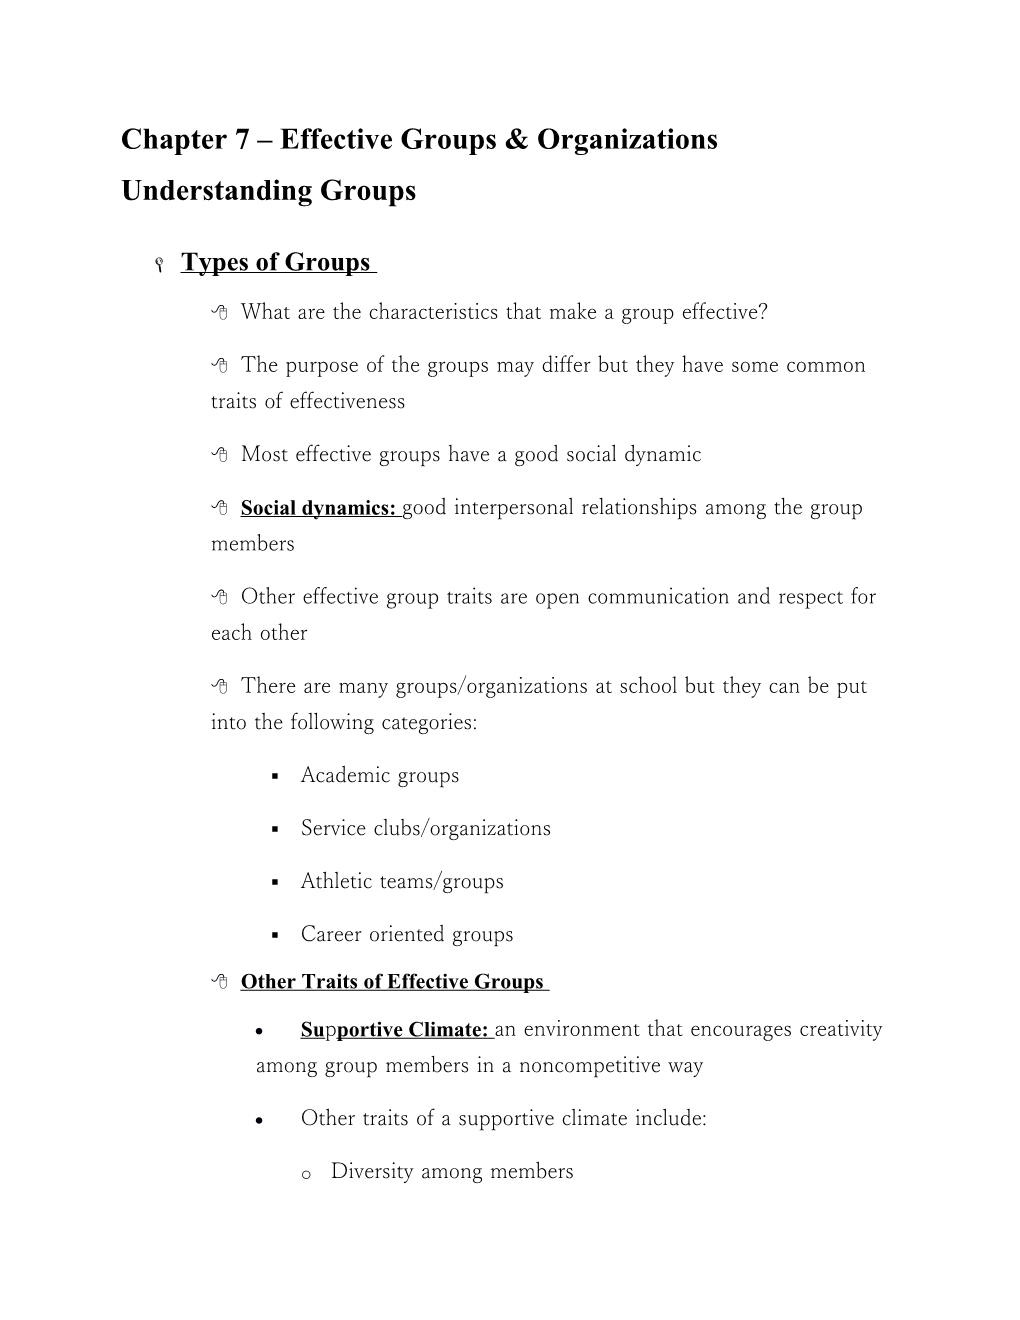 Chapter 7 Effective Groups & Organizations